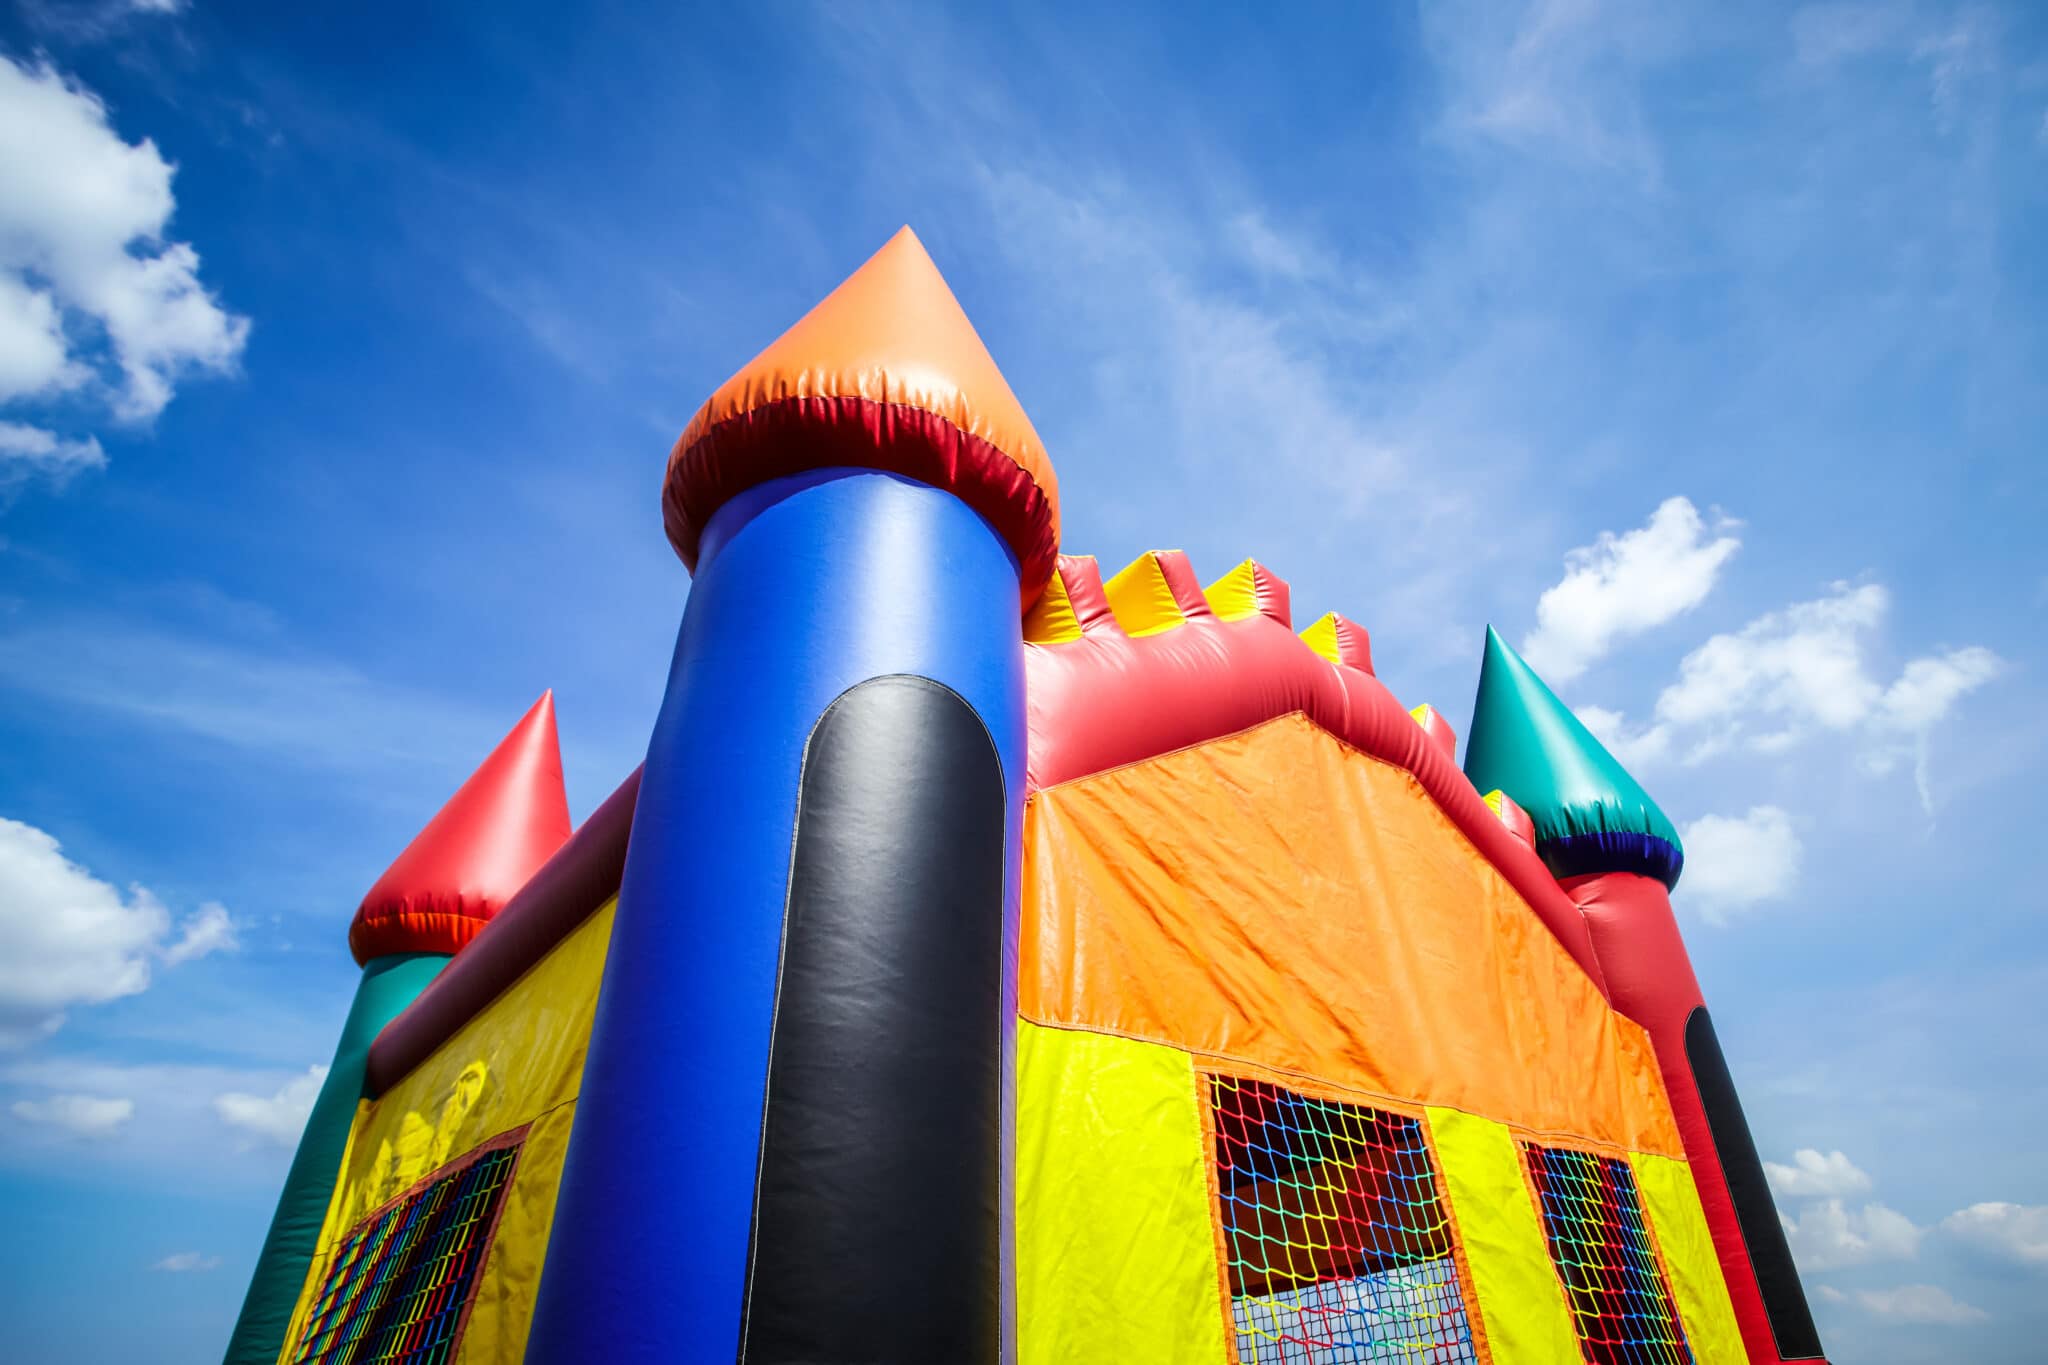 cleveland bounce house injuries